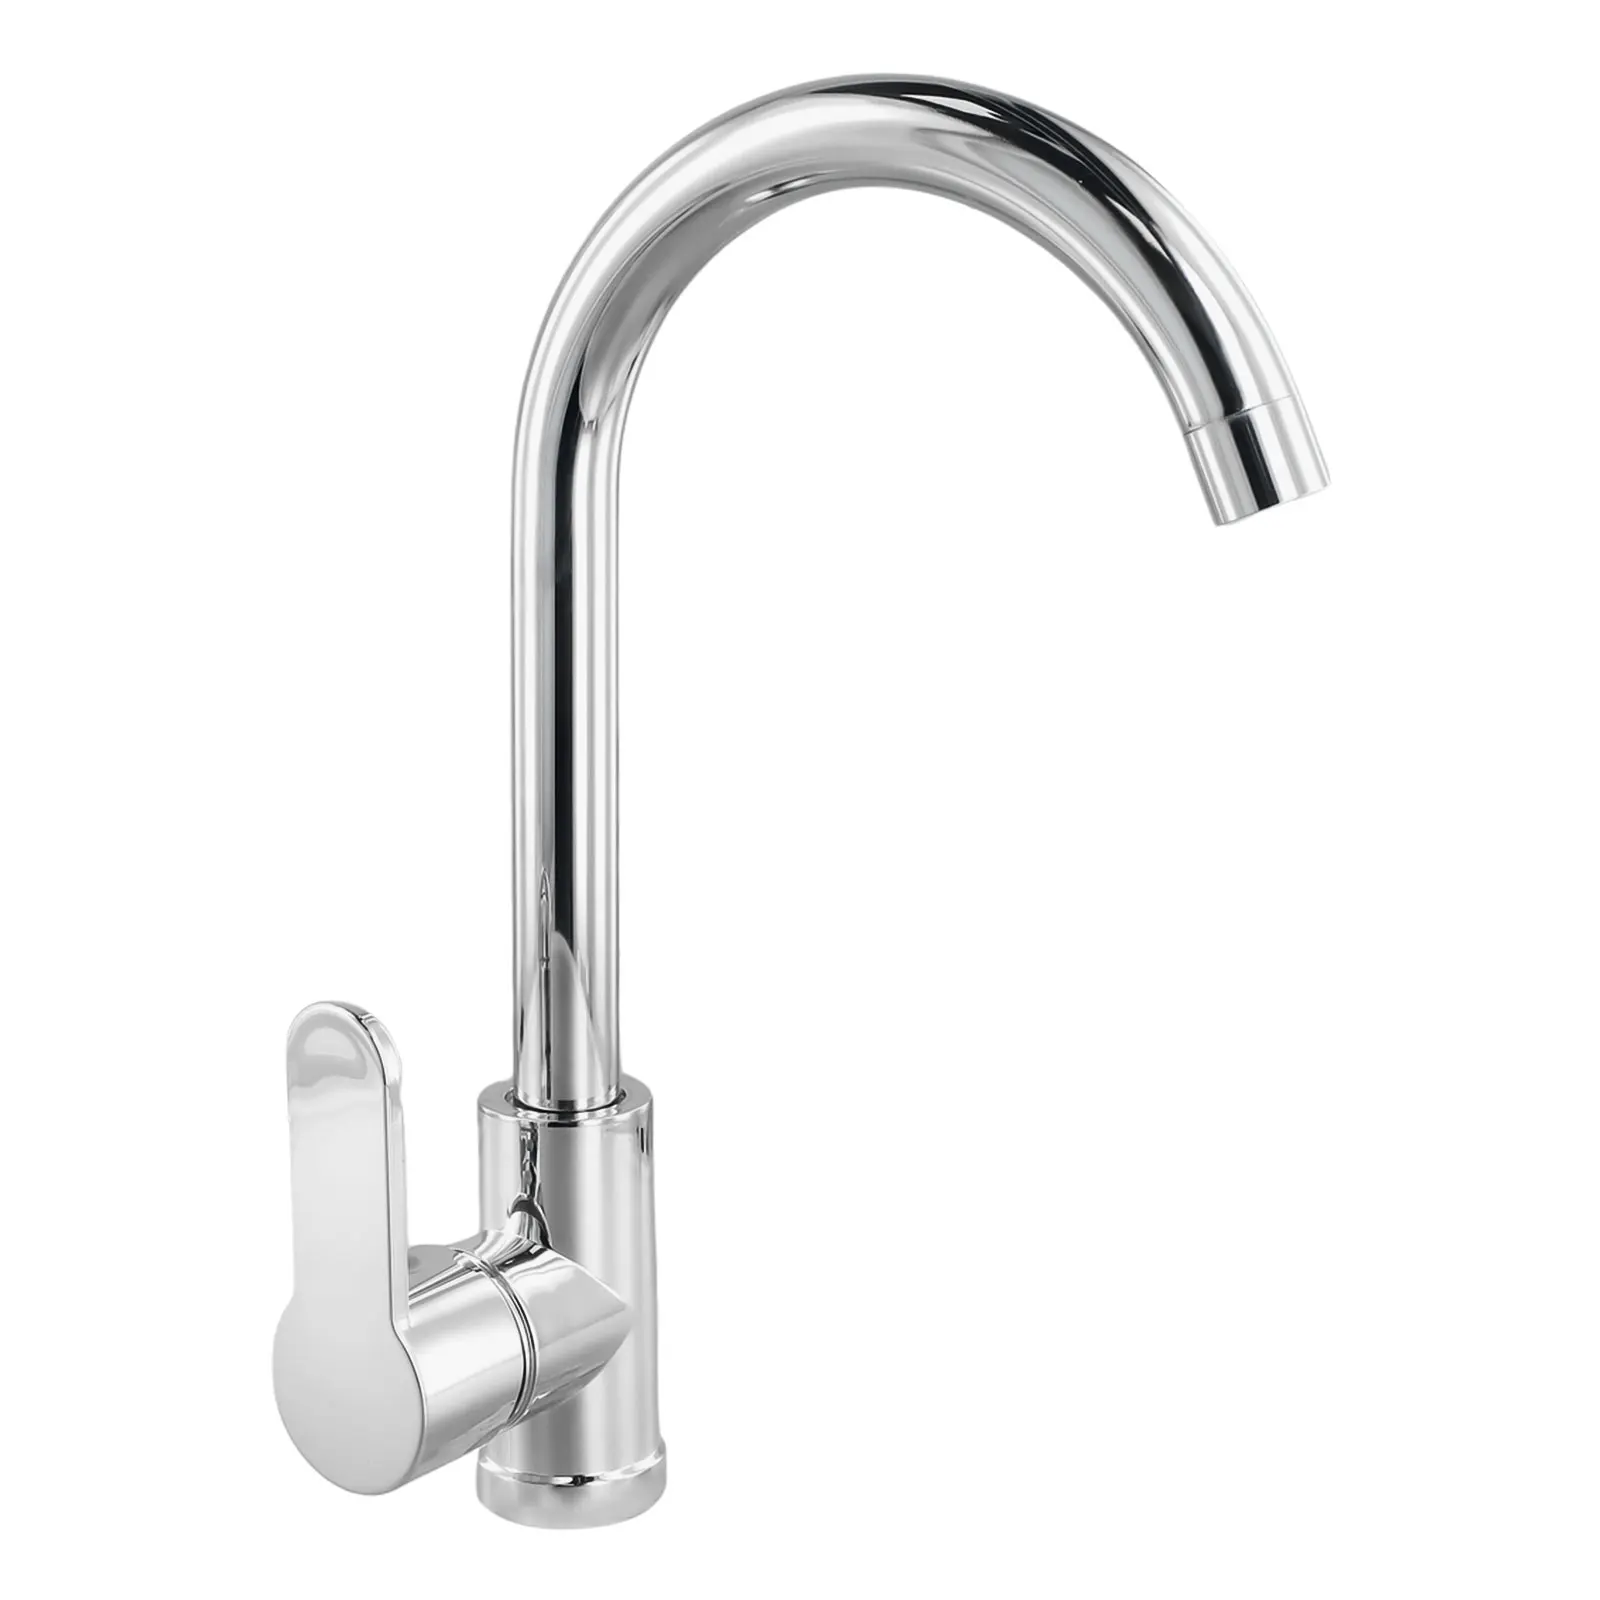 Stainless Steel Kitchen Faucet Polished Chrome Plated Swivel Basin Sink Cold Hot Easy To Operate Mixer Tap countertop basin faucet cold hot mixer basin tap kitchen bathroom accessories